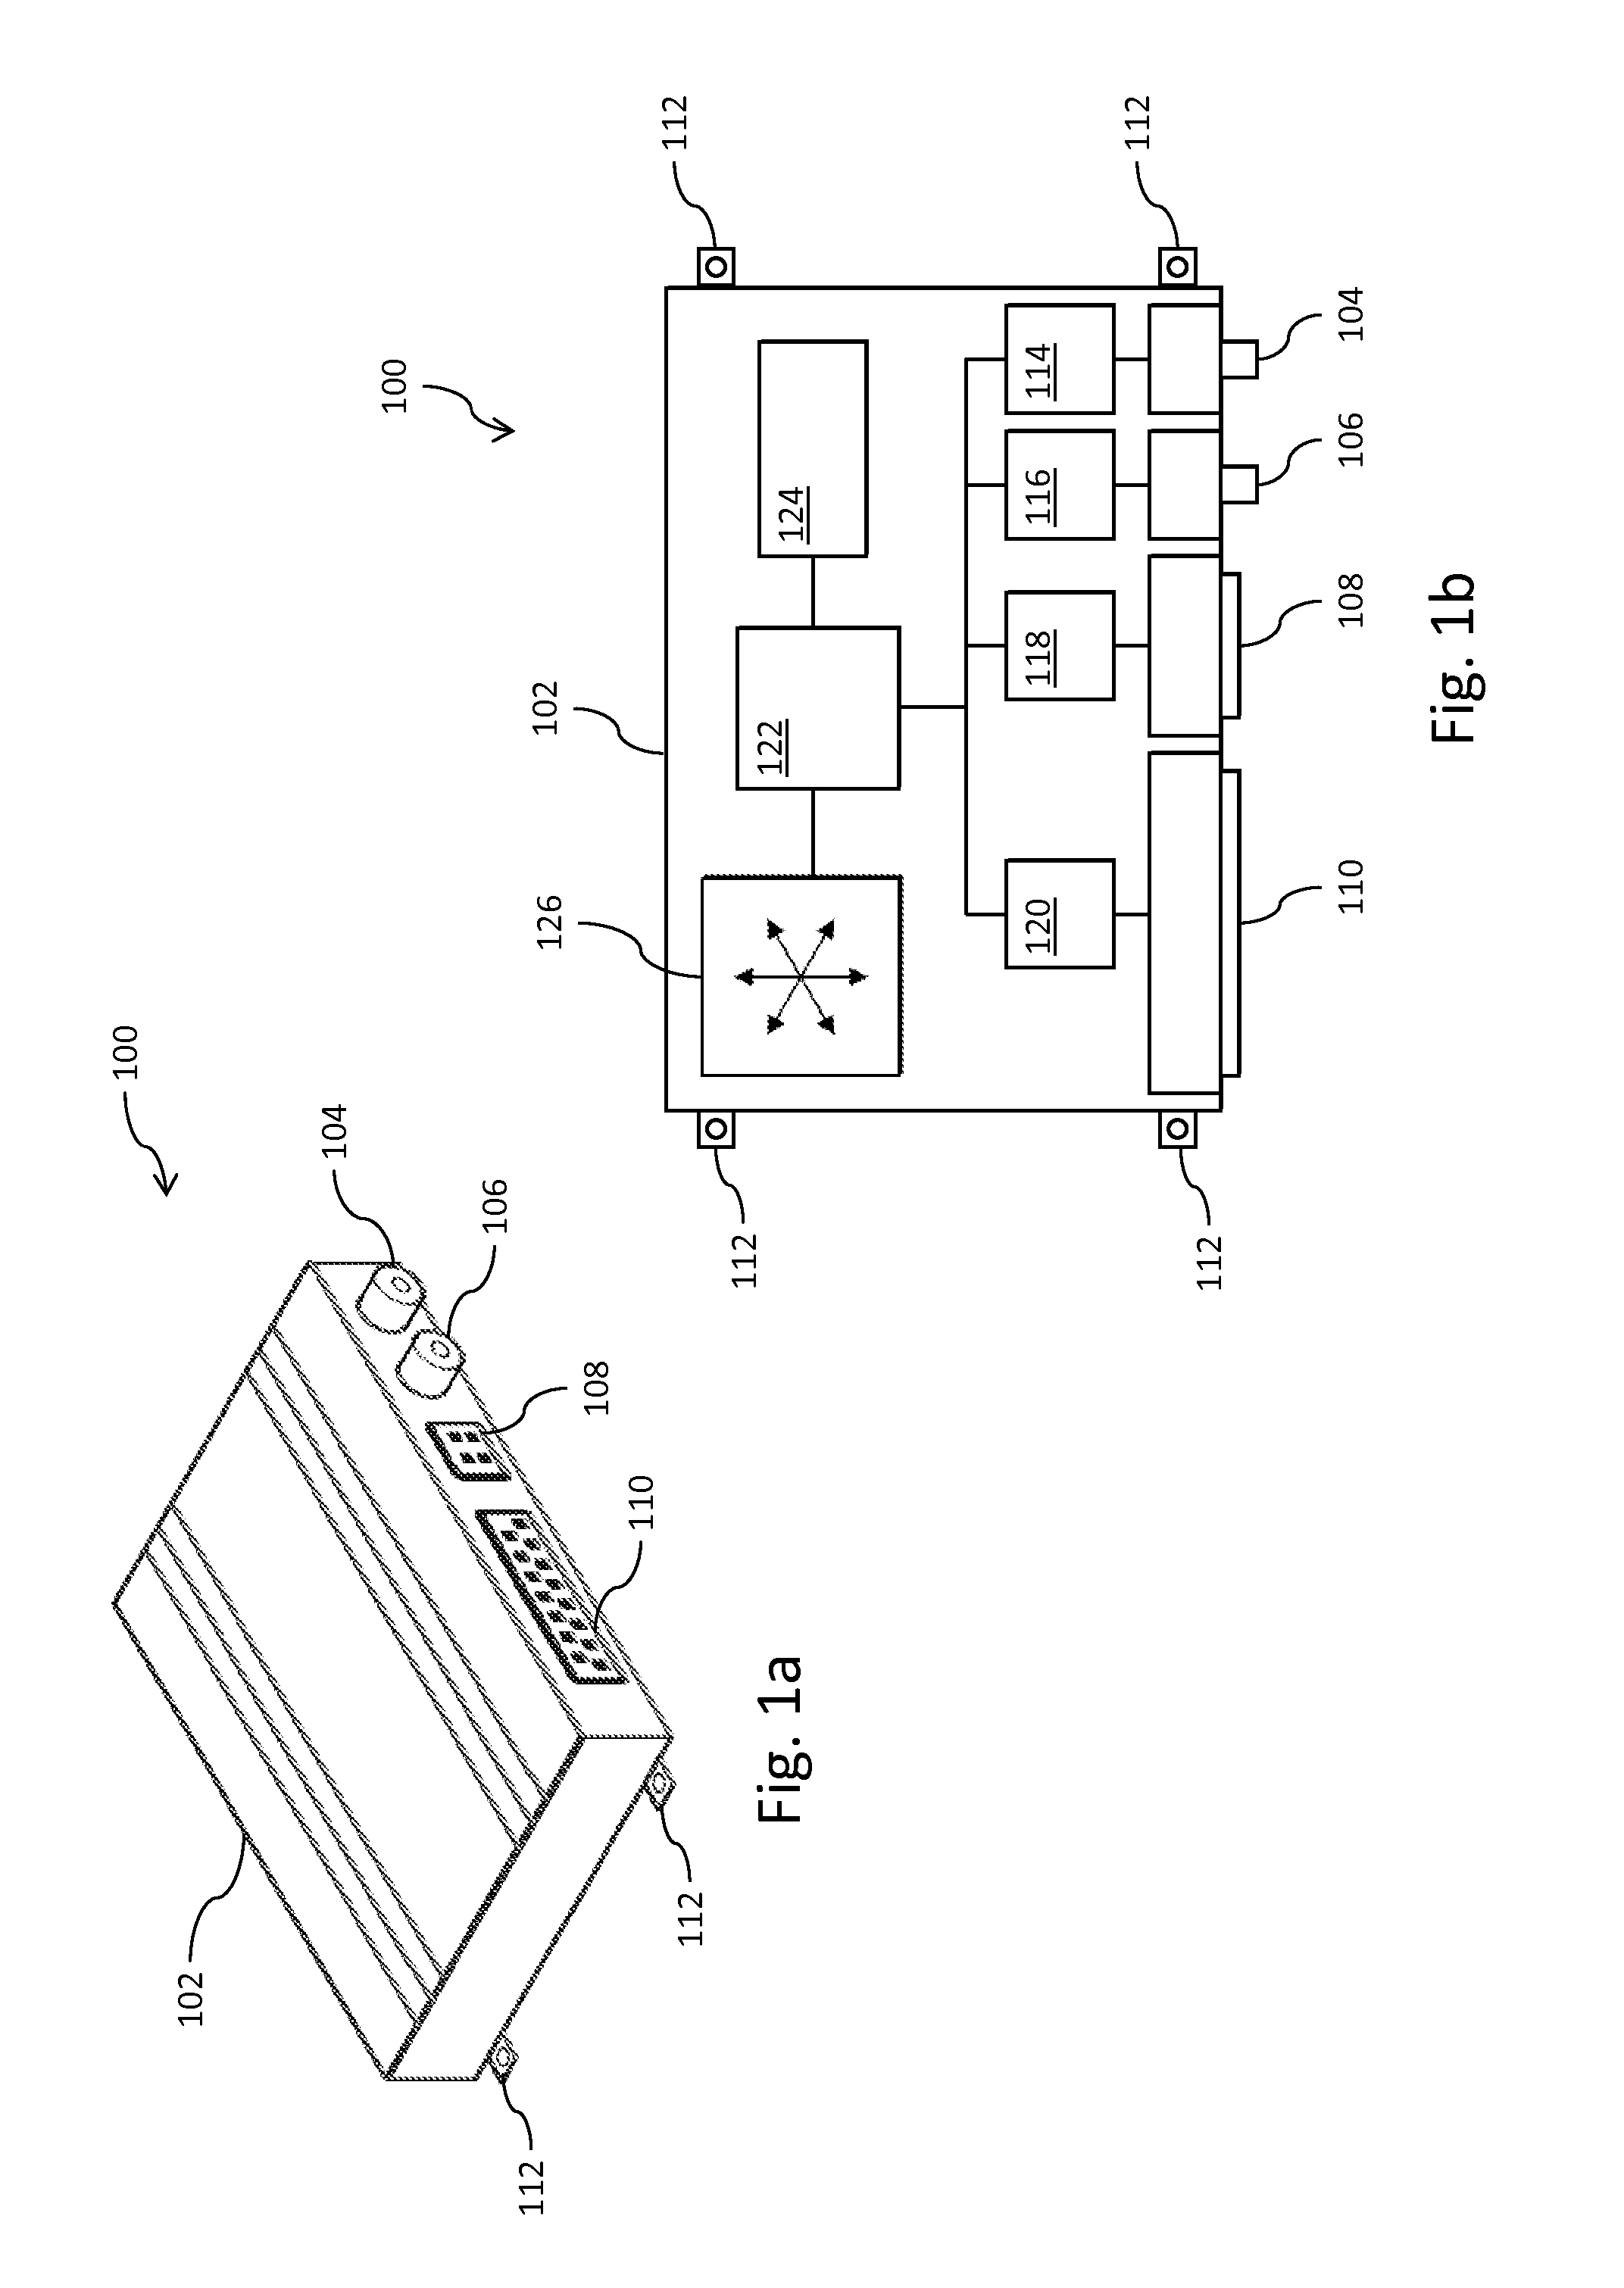 System and method for identifying a spatial relationship for use in calibrating accelerometer data